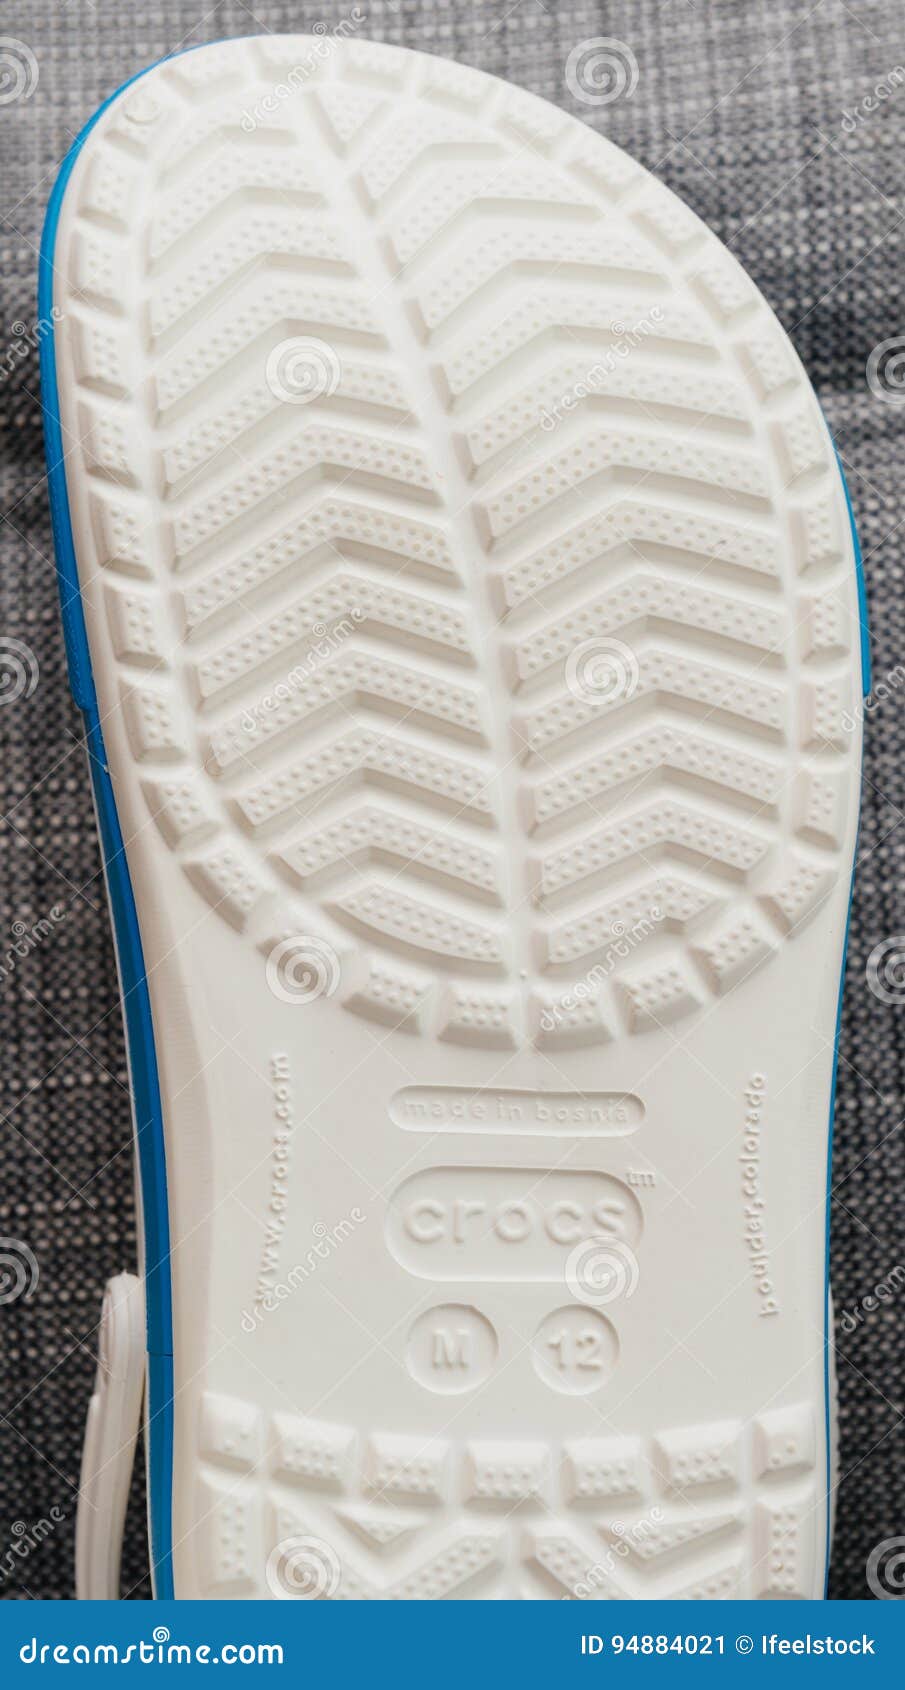 crocs are made in